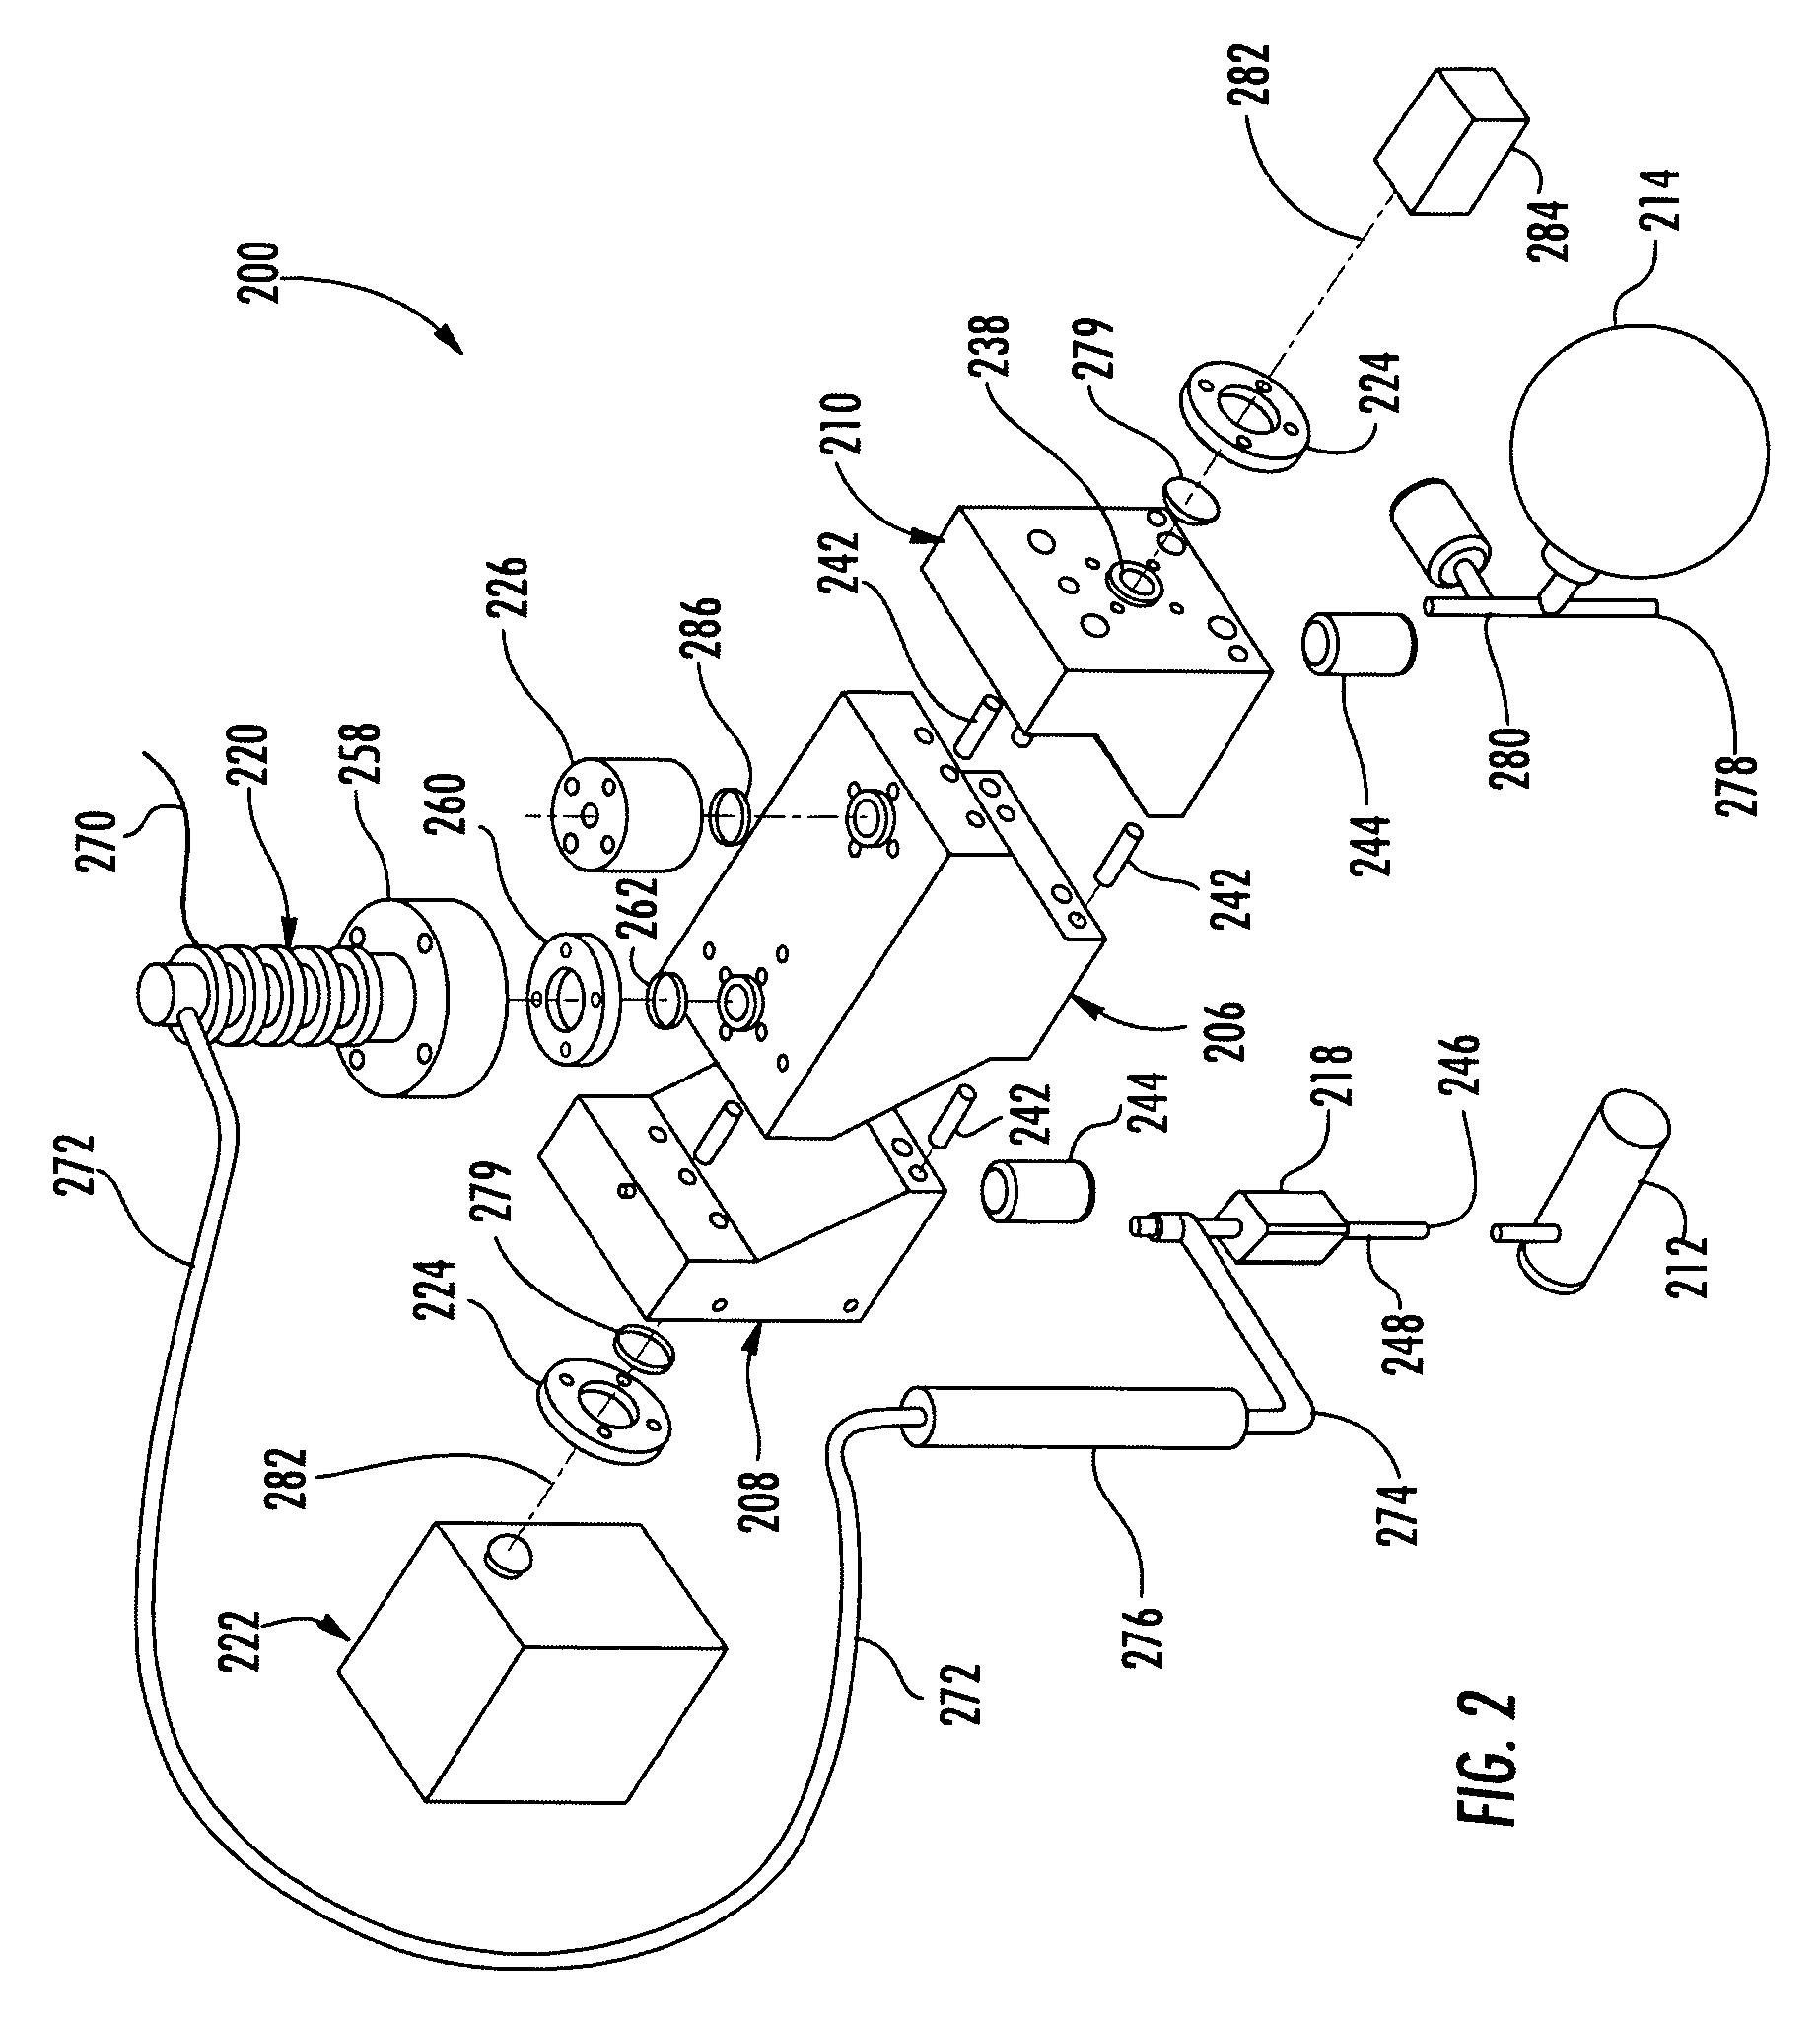 Method and apparatus for photoacoustic measurements